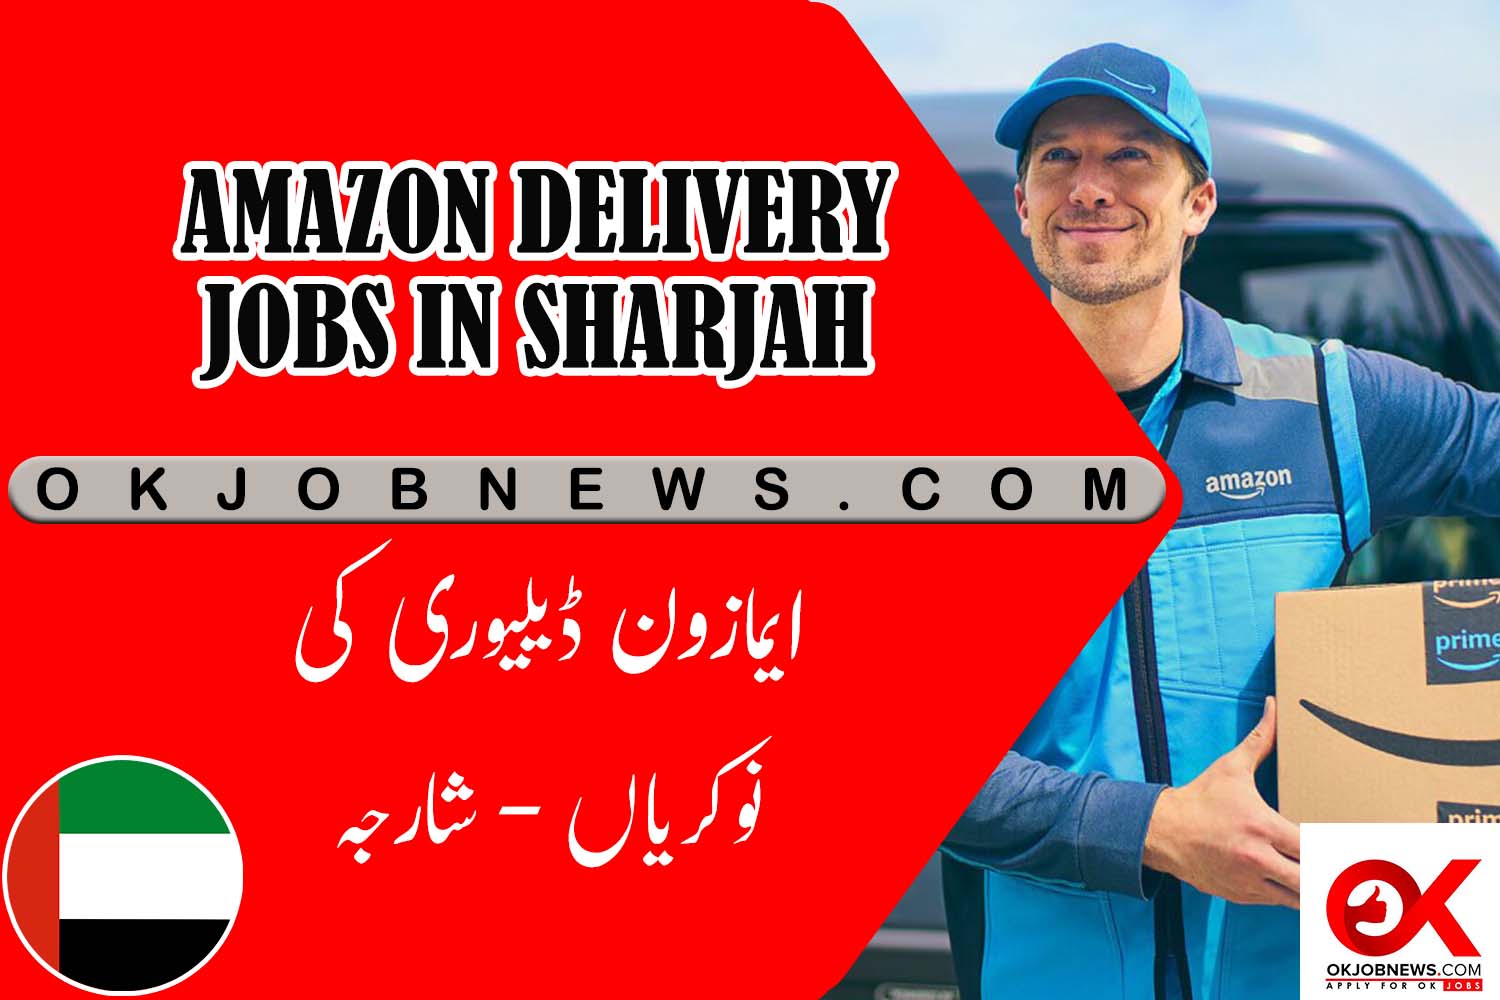 AMAZON DELIVERY JOBS IN SHARJAH